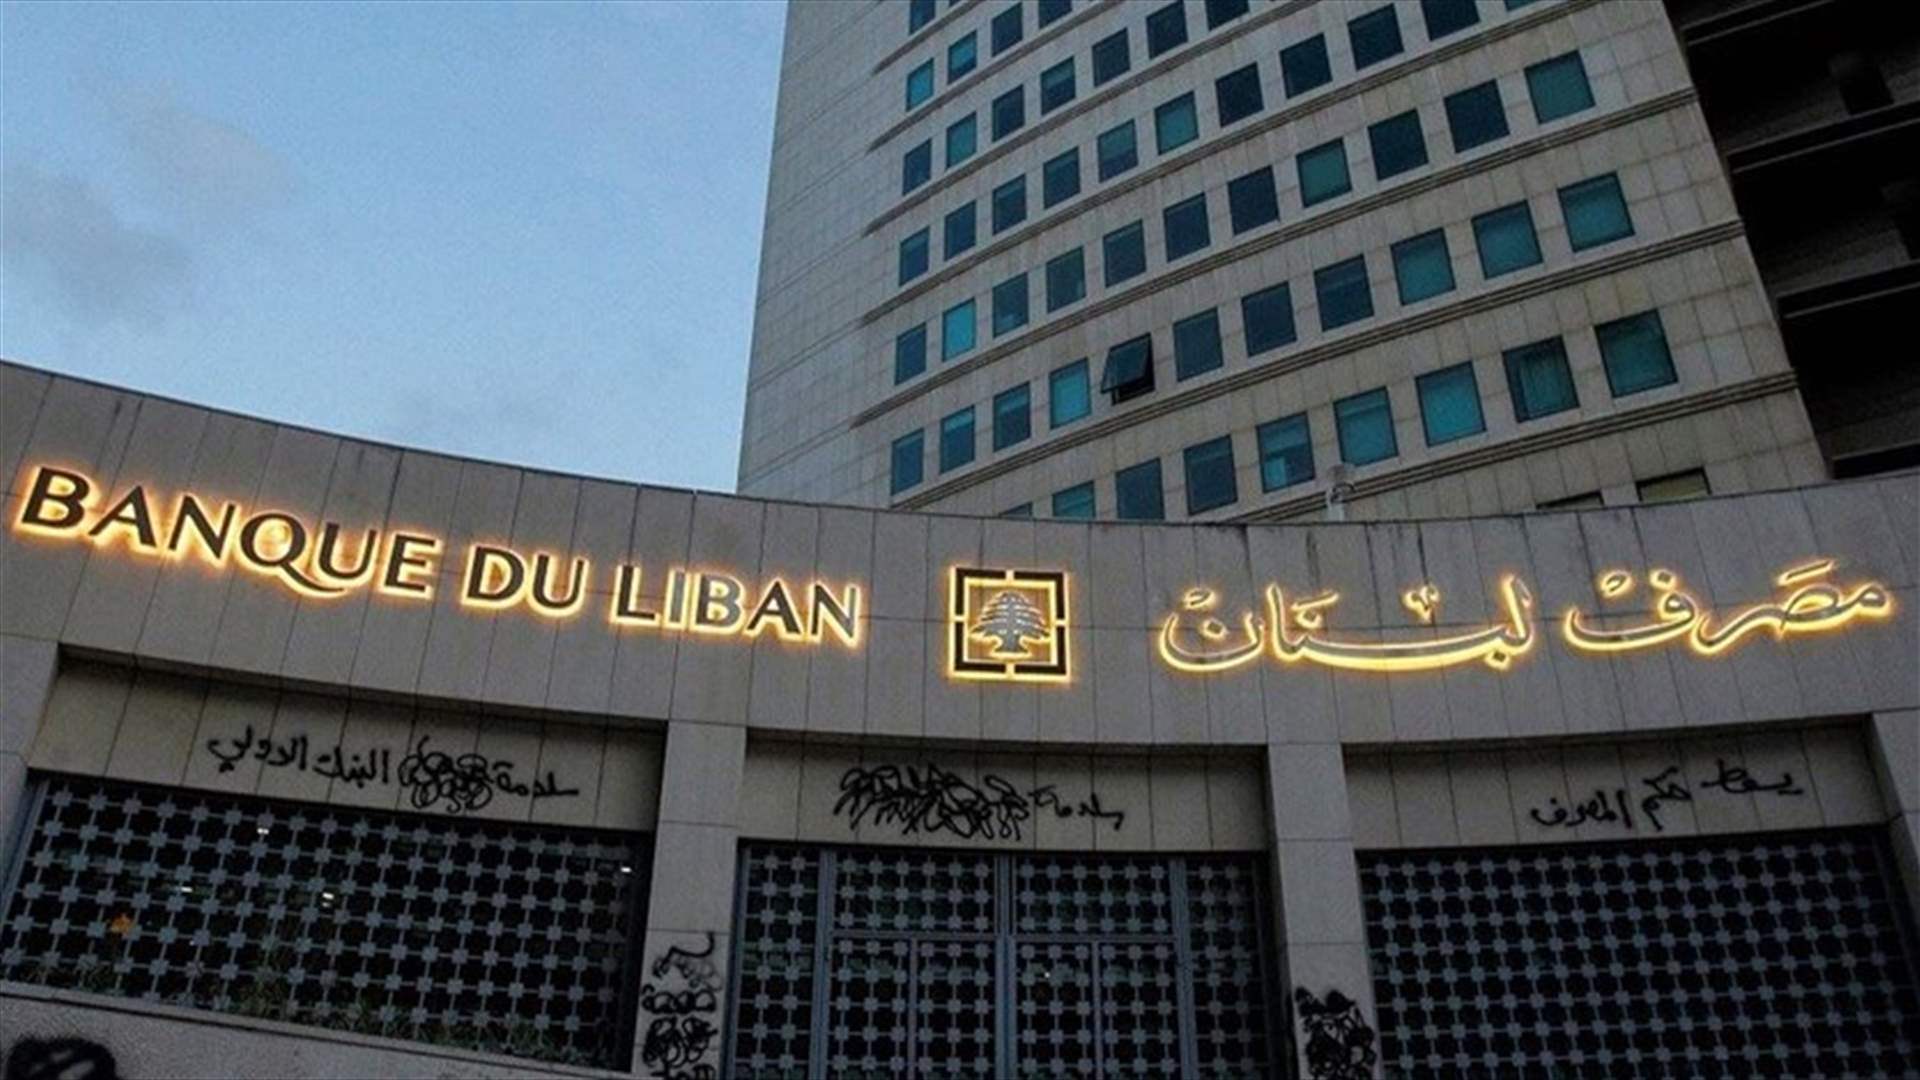 Lebanon’s currency dilemma: Central Bank of Lebanon explores banknotes printing options